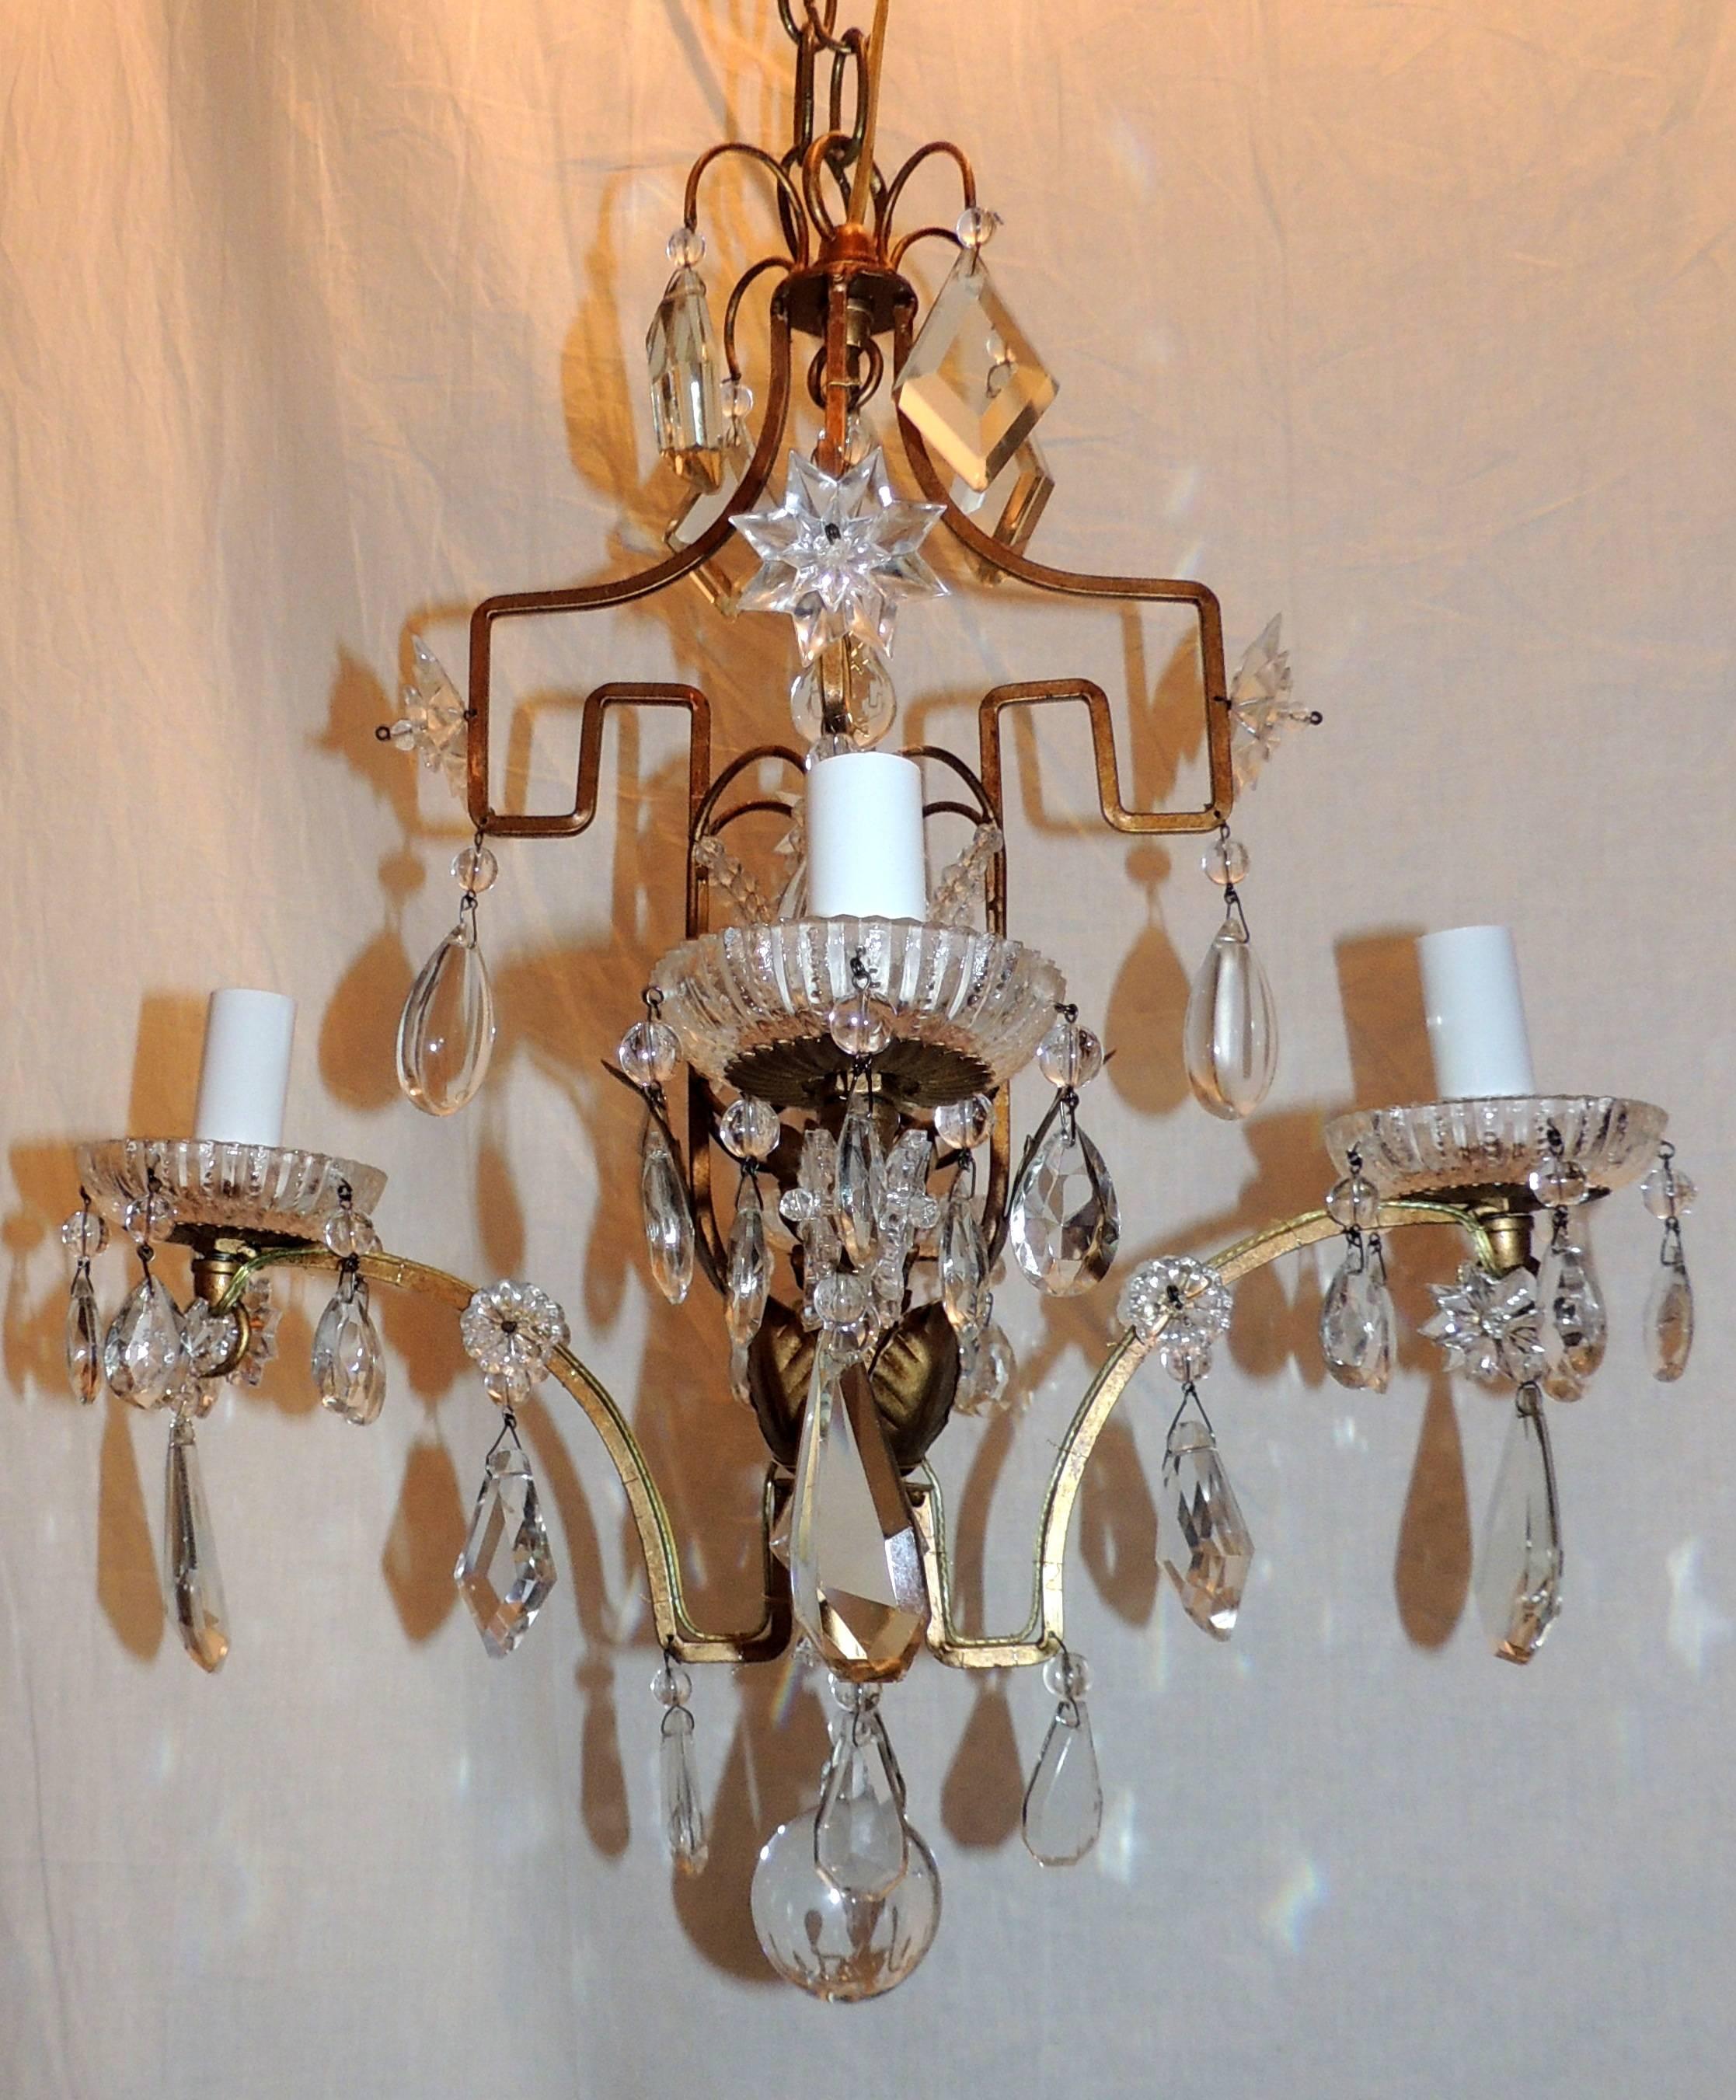 A wonderful Bagues French gilt crystal beaded petite chandelier four-light fixture with a beautiful crown and surrounded by crystal stars.
The perfect piece for a small space.